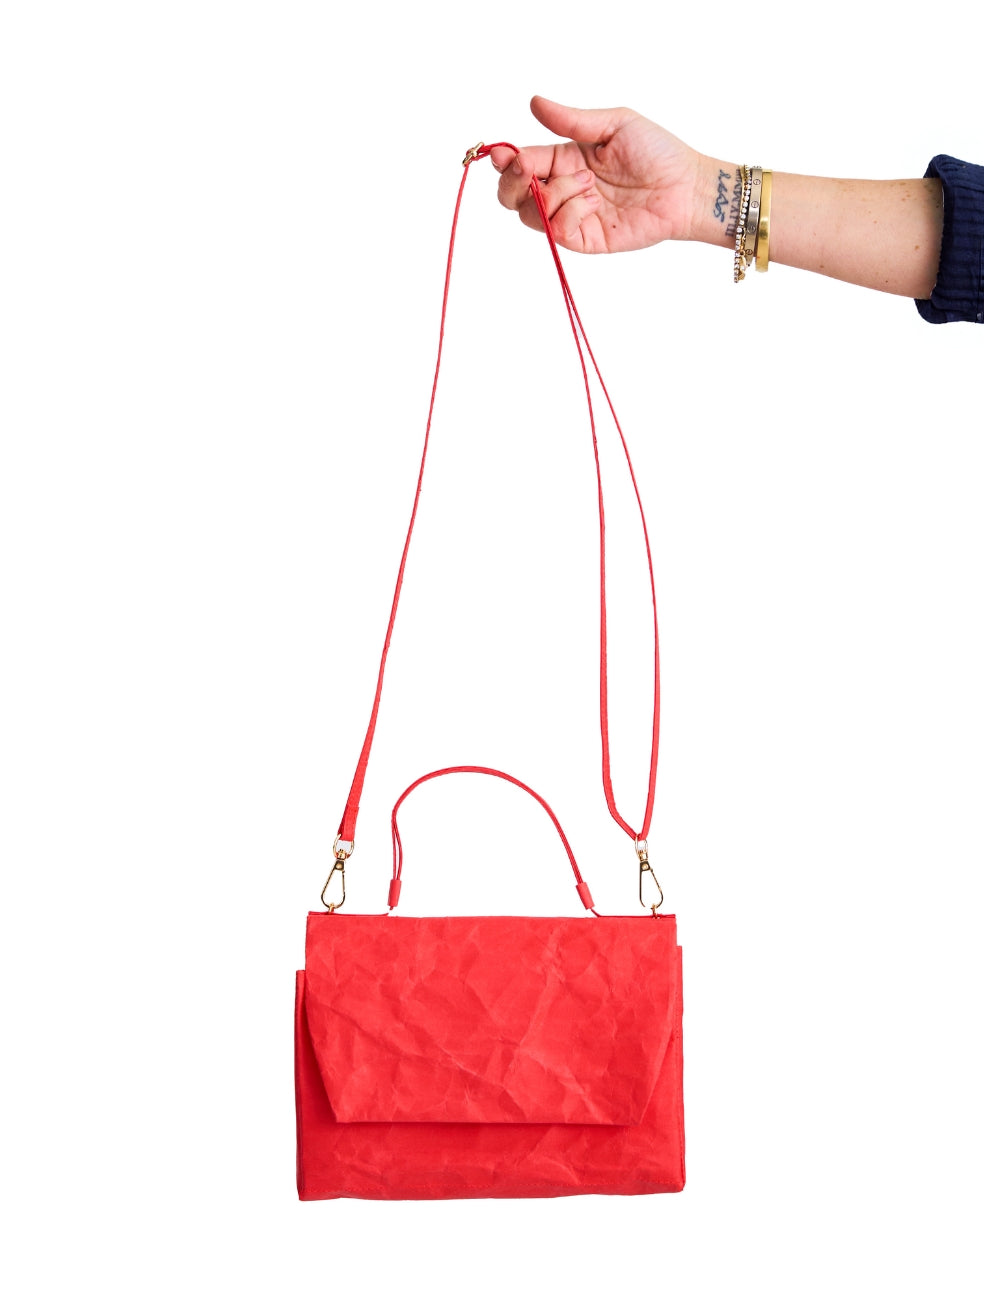 Paper purse cross body bag sustainably crafted tart red